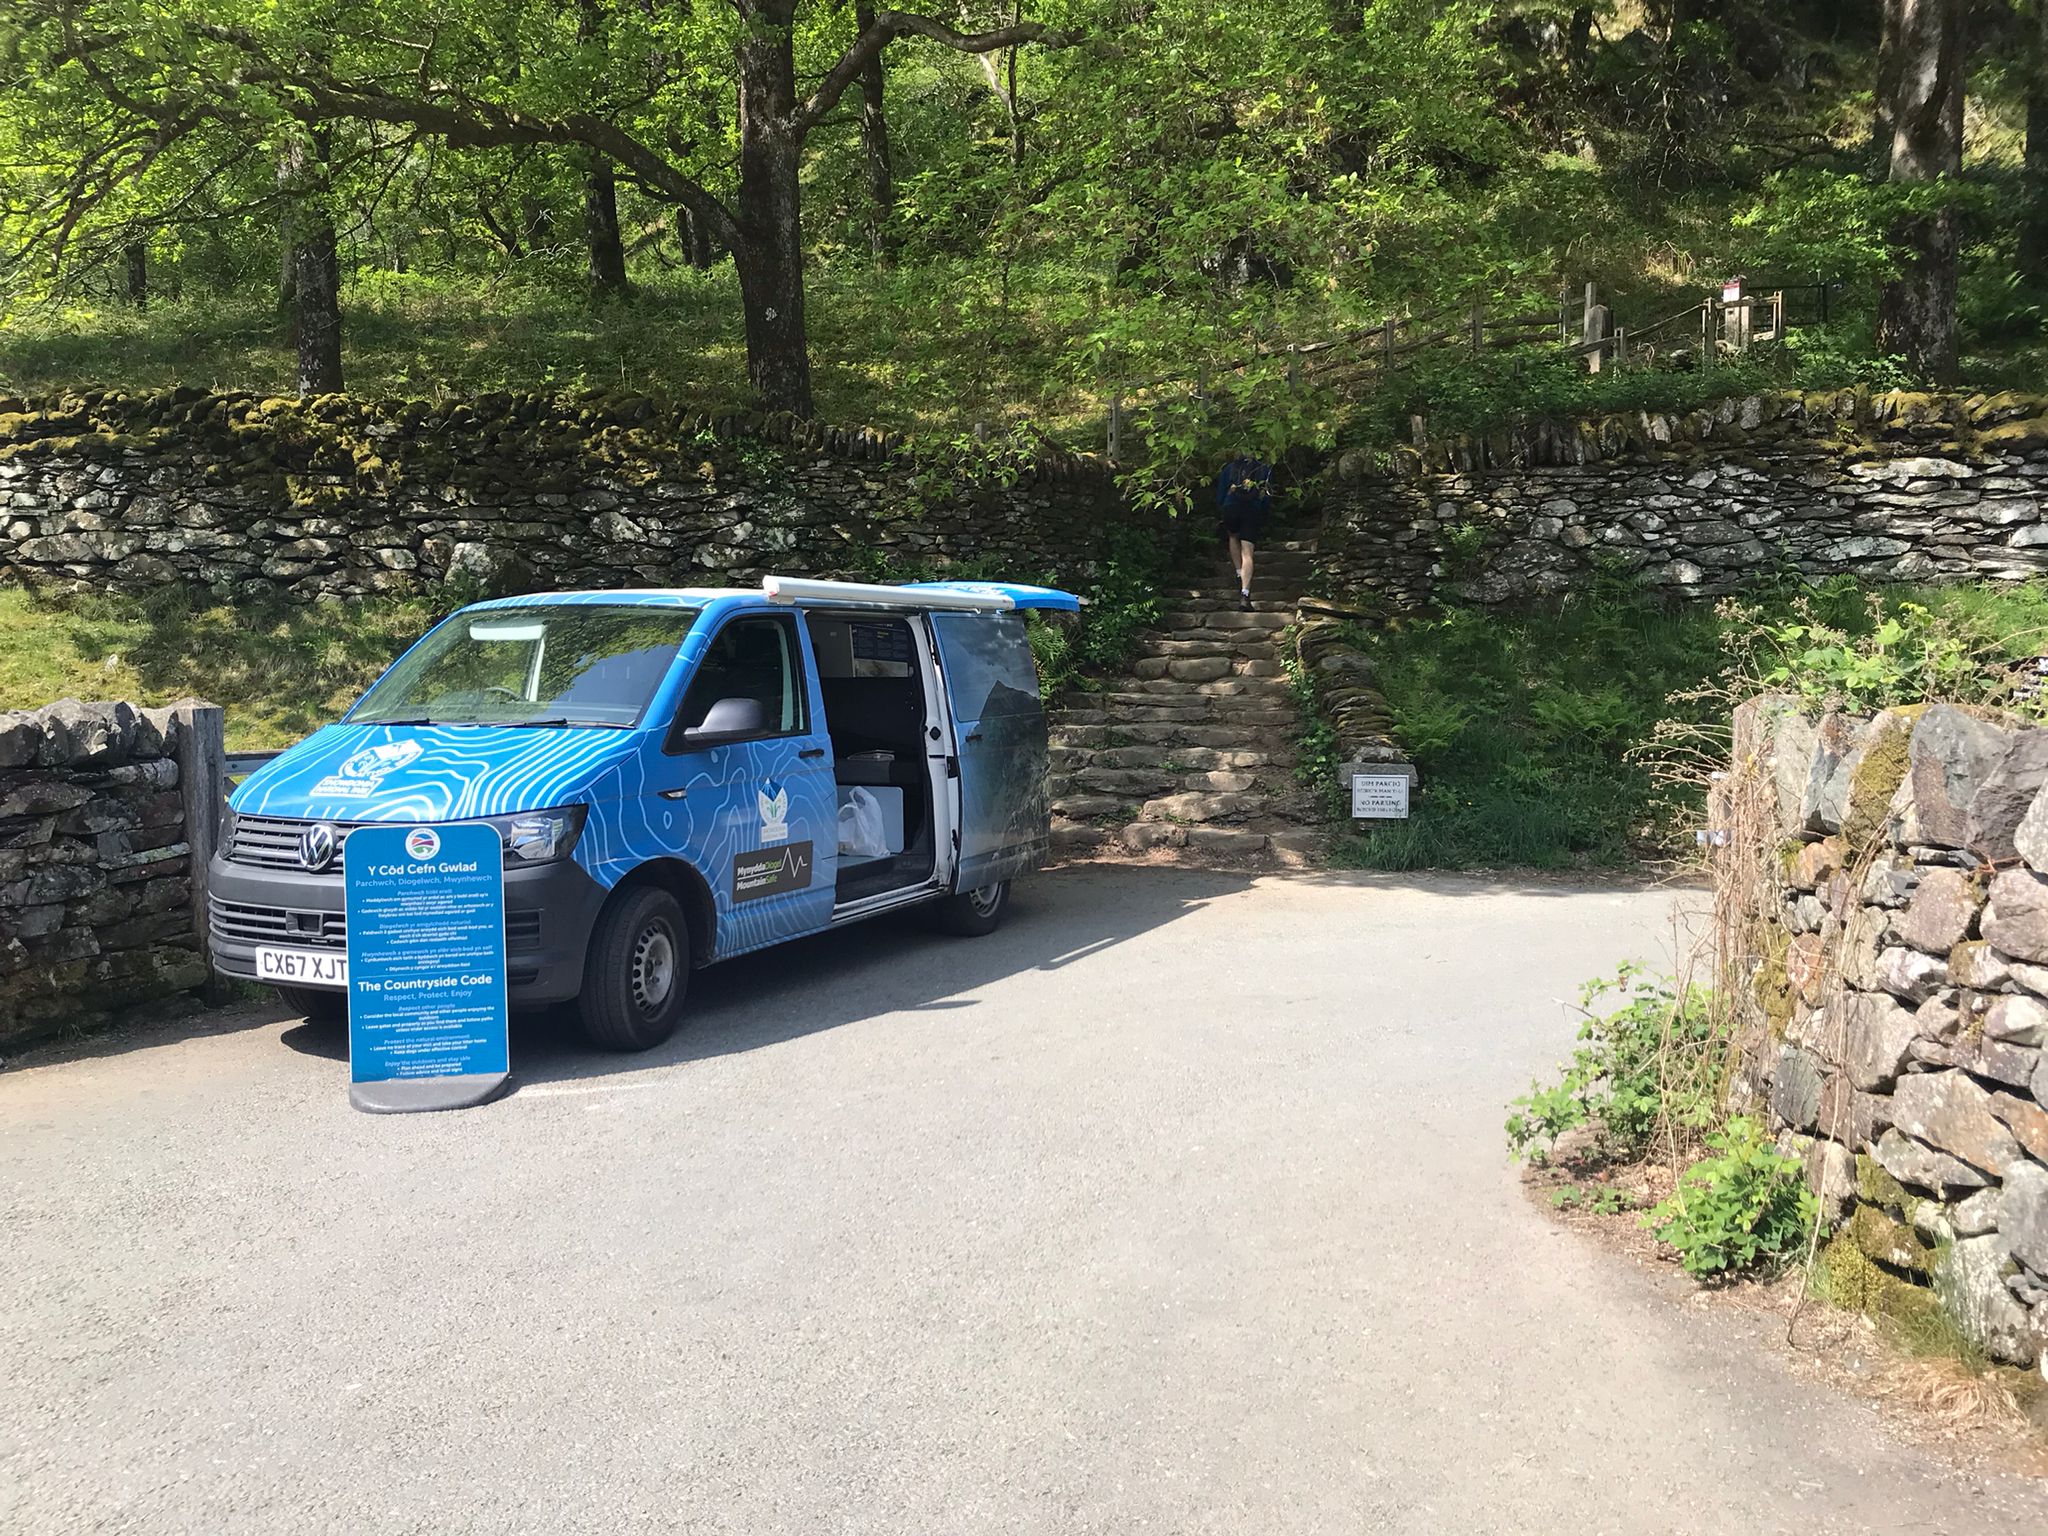 Multi-Agency Collaboration to Promote Responsible Tourism at Nant Gwynant & the Watkin Path